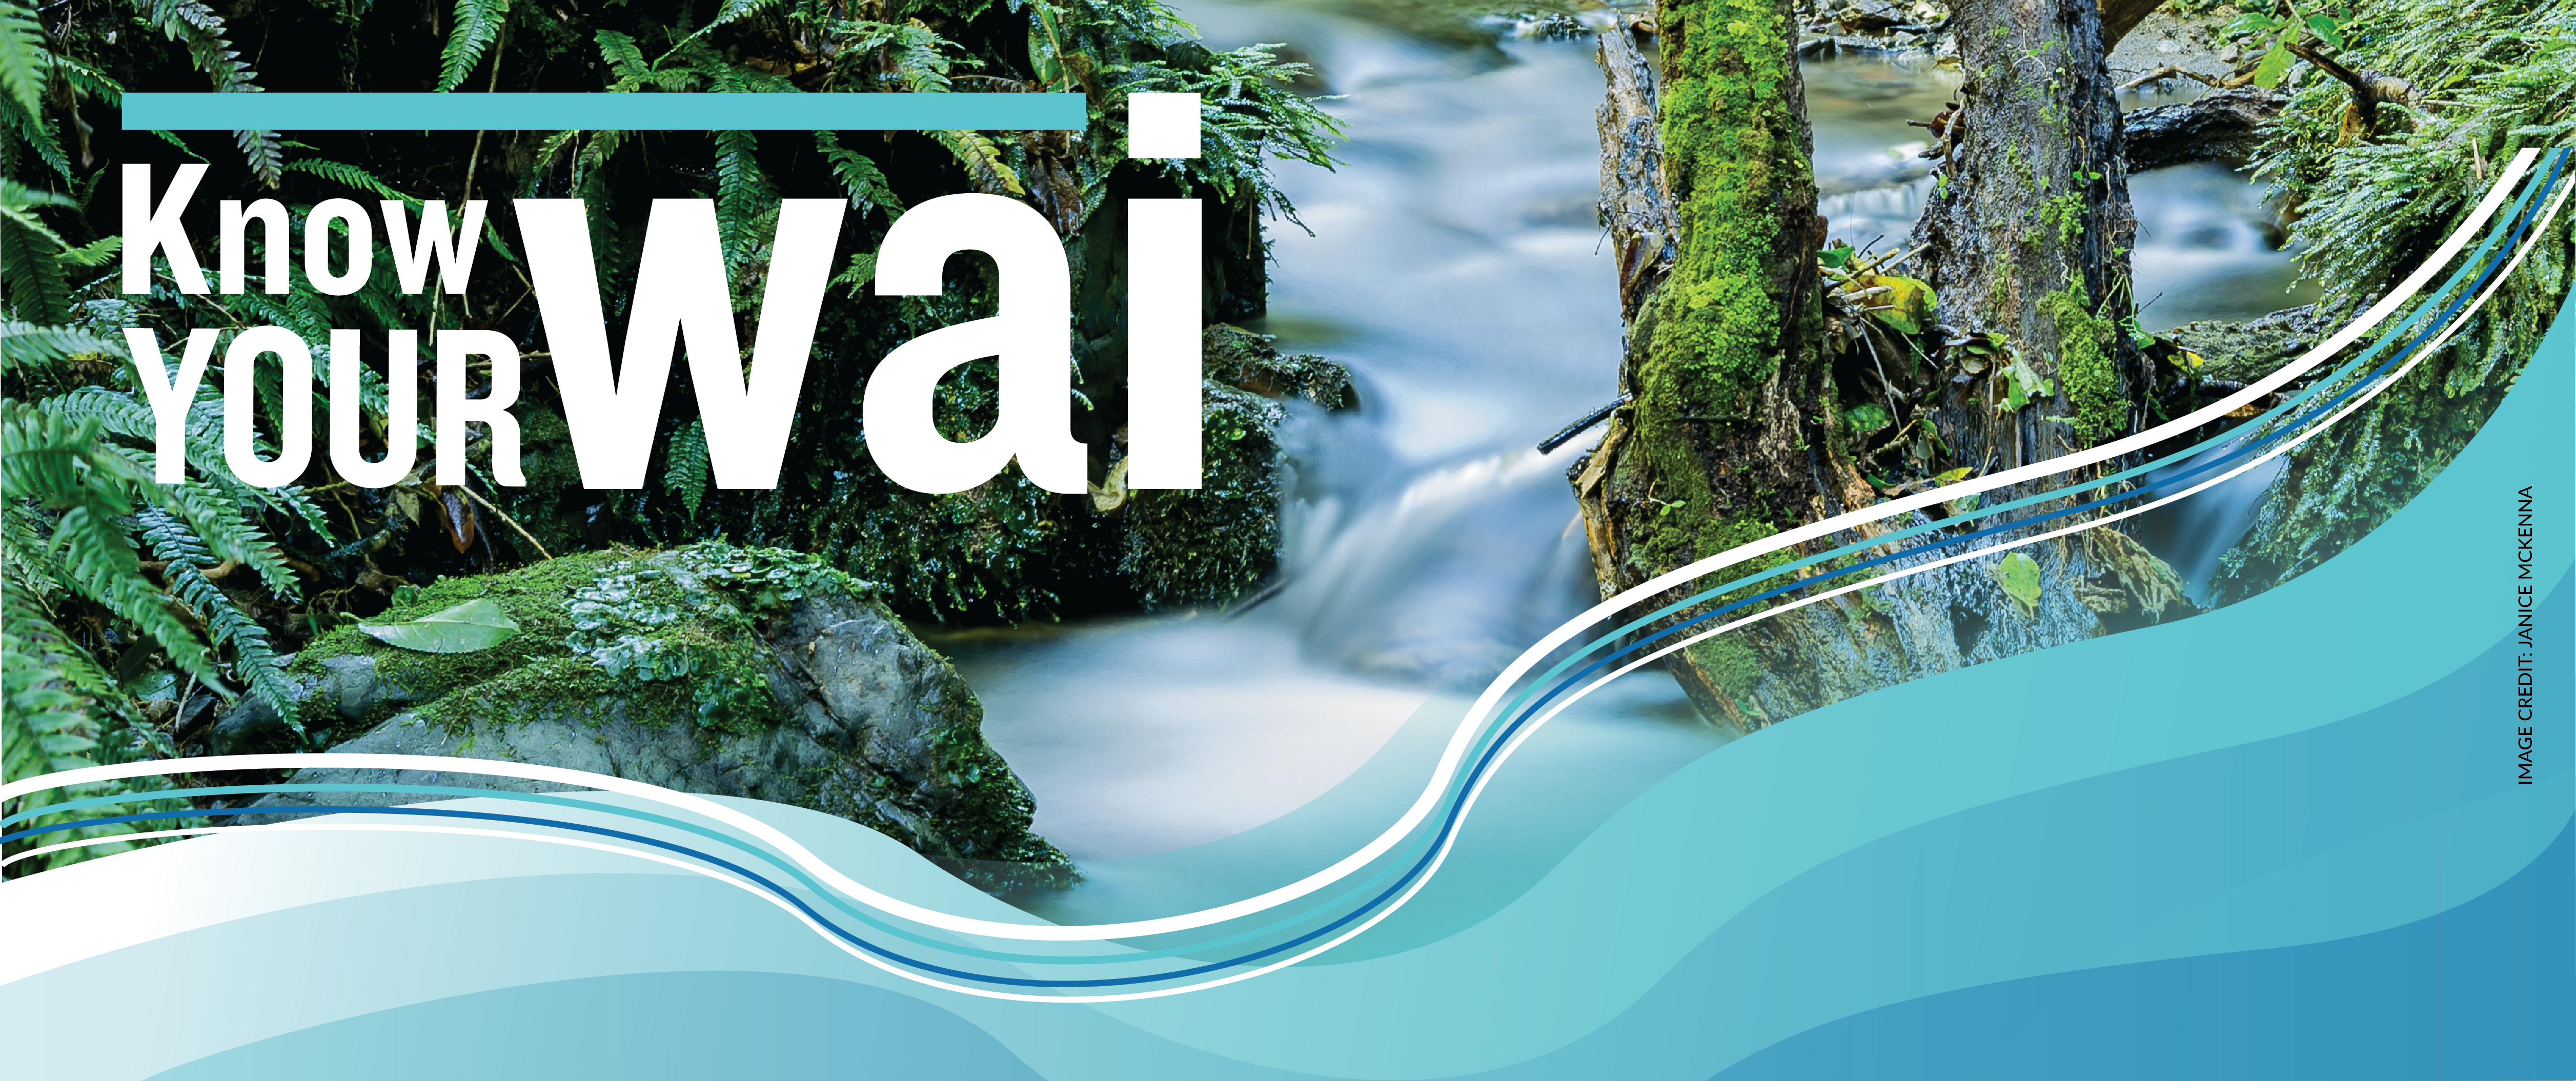 Know your wai - fresh water stream with fast flowing water